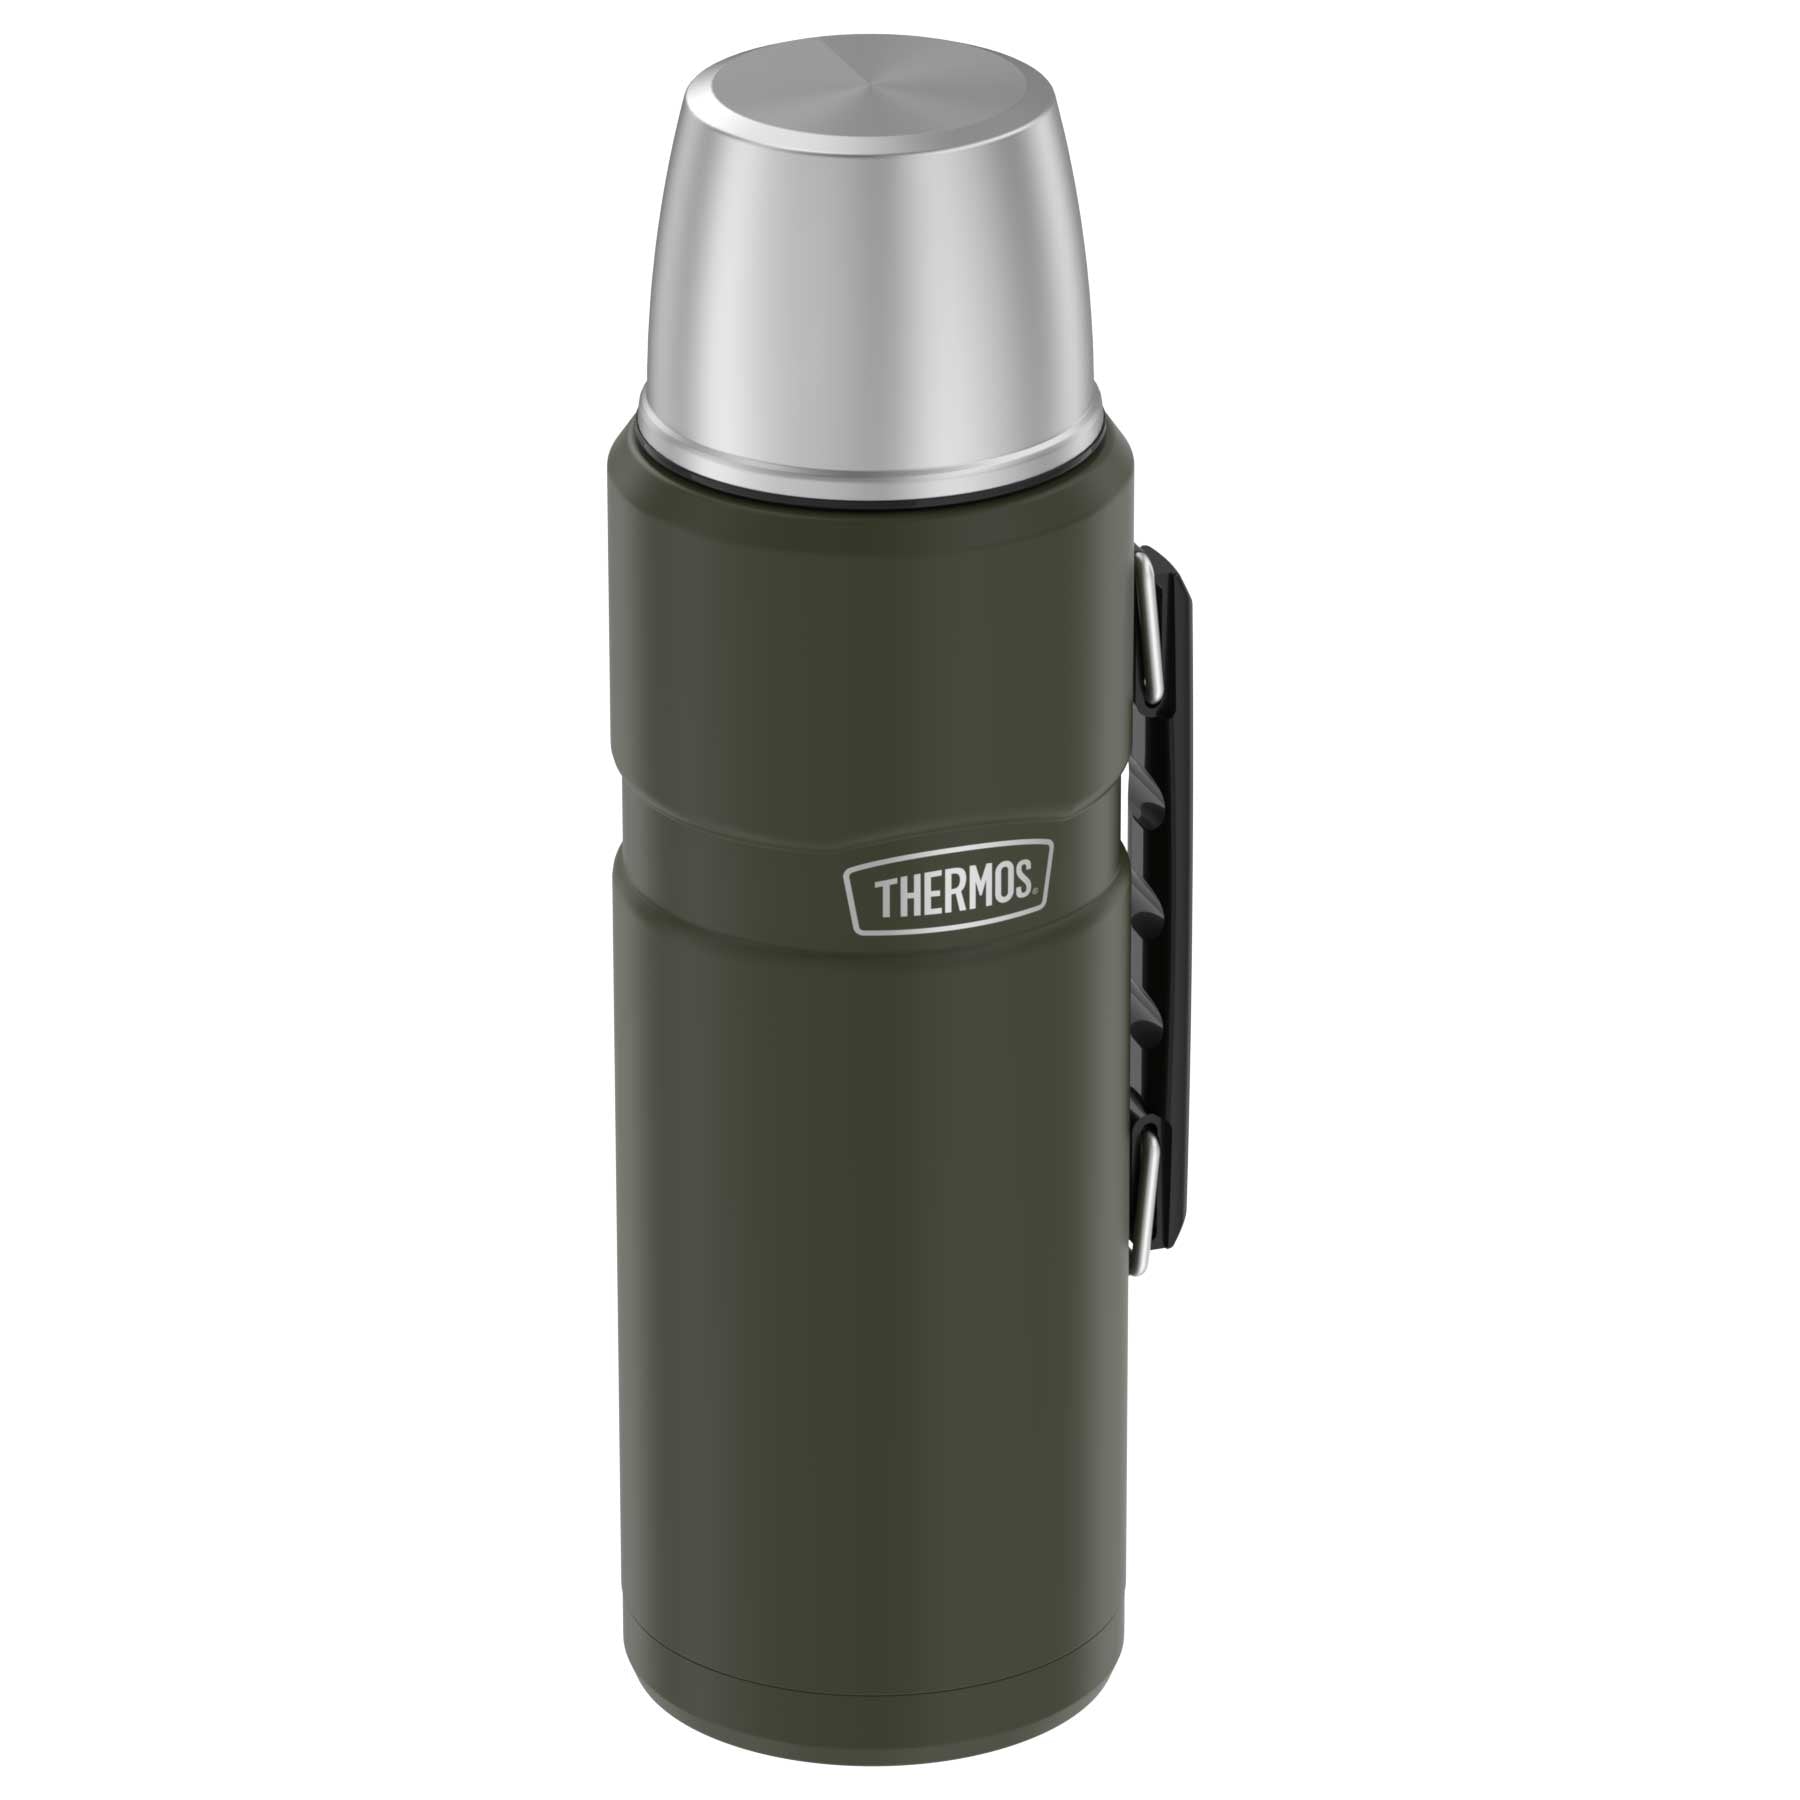 Stainless Steel Thermos with 2 Cups